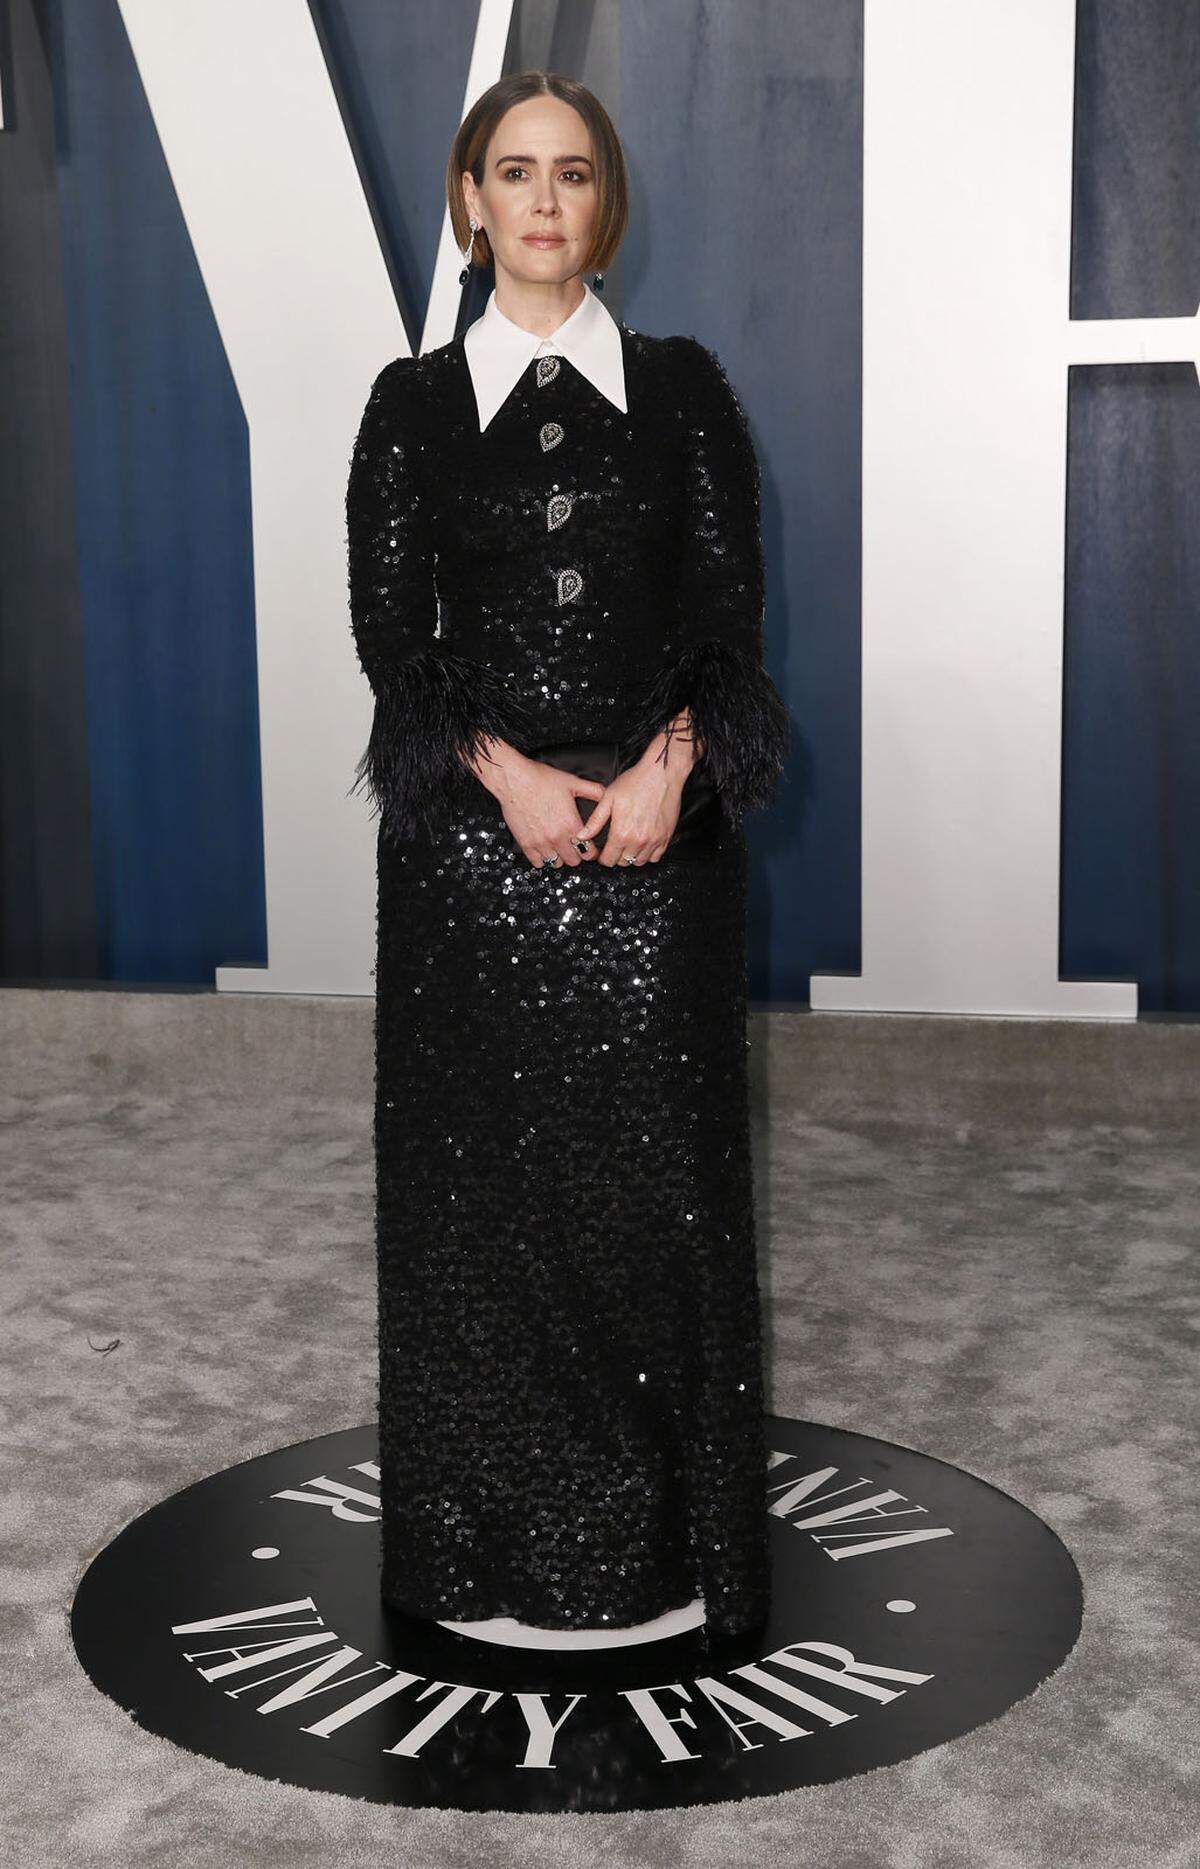 Sarah Paulson in Andrew Gn.